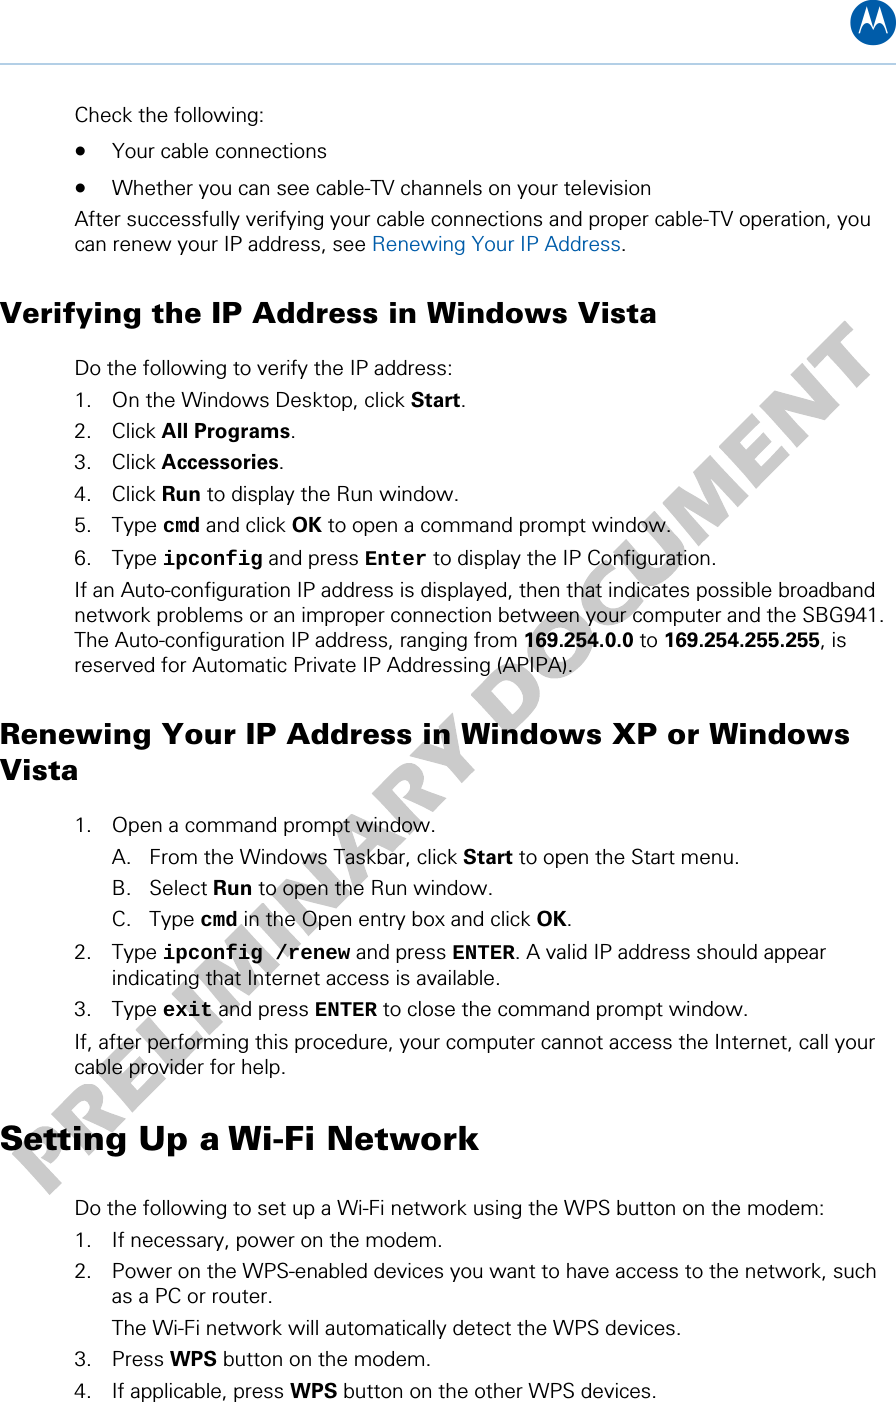 B Check the following: • Your cable connections • Whether you can see cable-TV channels on your television After successfully verifying your cable connections and proper cable-TV operation, you can renew your IP address, see Renewing Your IP Address. Verifying the IP Address in Windows Vista Do the following to verify the IP address: 1. On the Windows Desktop, click Start. 2. Click All Programs. 3. Click Accessories. 4. Click Run to display the Run window. 5. Type cmd and click OK to open a command prompt window. 6. Type ipconfig and press Enter to display the IP Configuration. If an Auto-configuration IP address is displayed, then that indicates possible broadband network problems or an improper connection between your computer and the SBG941. The Auto-configuration IP address, ranging from 169.254.0.0 to 169.254.255.255, is reserved for Automatic Private IP Addressing (APIPA).  Renewing Your IP Address in Windows XP or Windows Vista  1. Open a command prompt window. A. From the Windows Taskbar, click Start to open the Start menu. B. Select Run to open the Run window. C. Type cmd in the Open entry box and click OK. 2. Type ipconfig /renew and press ENTER. A valid IP address should appear indicating that Internet access is available. 3. Type exit and press ENTER to close the command prompt window.  If, after performing this procedure, your computer cannot access the Internet, call your cable provider for help. Setting Up a Wi-Fi Network Do the following to set up a Wi-Fi network using the WPS button on the modem: 1. If necessary, power on the modem. 2. Power on the WPS-enabled devices you want to have access to the network, such as a PC or router. The Wi-Fi network will automatically detect the WPS devices.  3. Press WPS button on the modem. 4. If applicable, press WPS button on the other WPS devices. 3 • Installing the Modem 14   